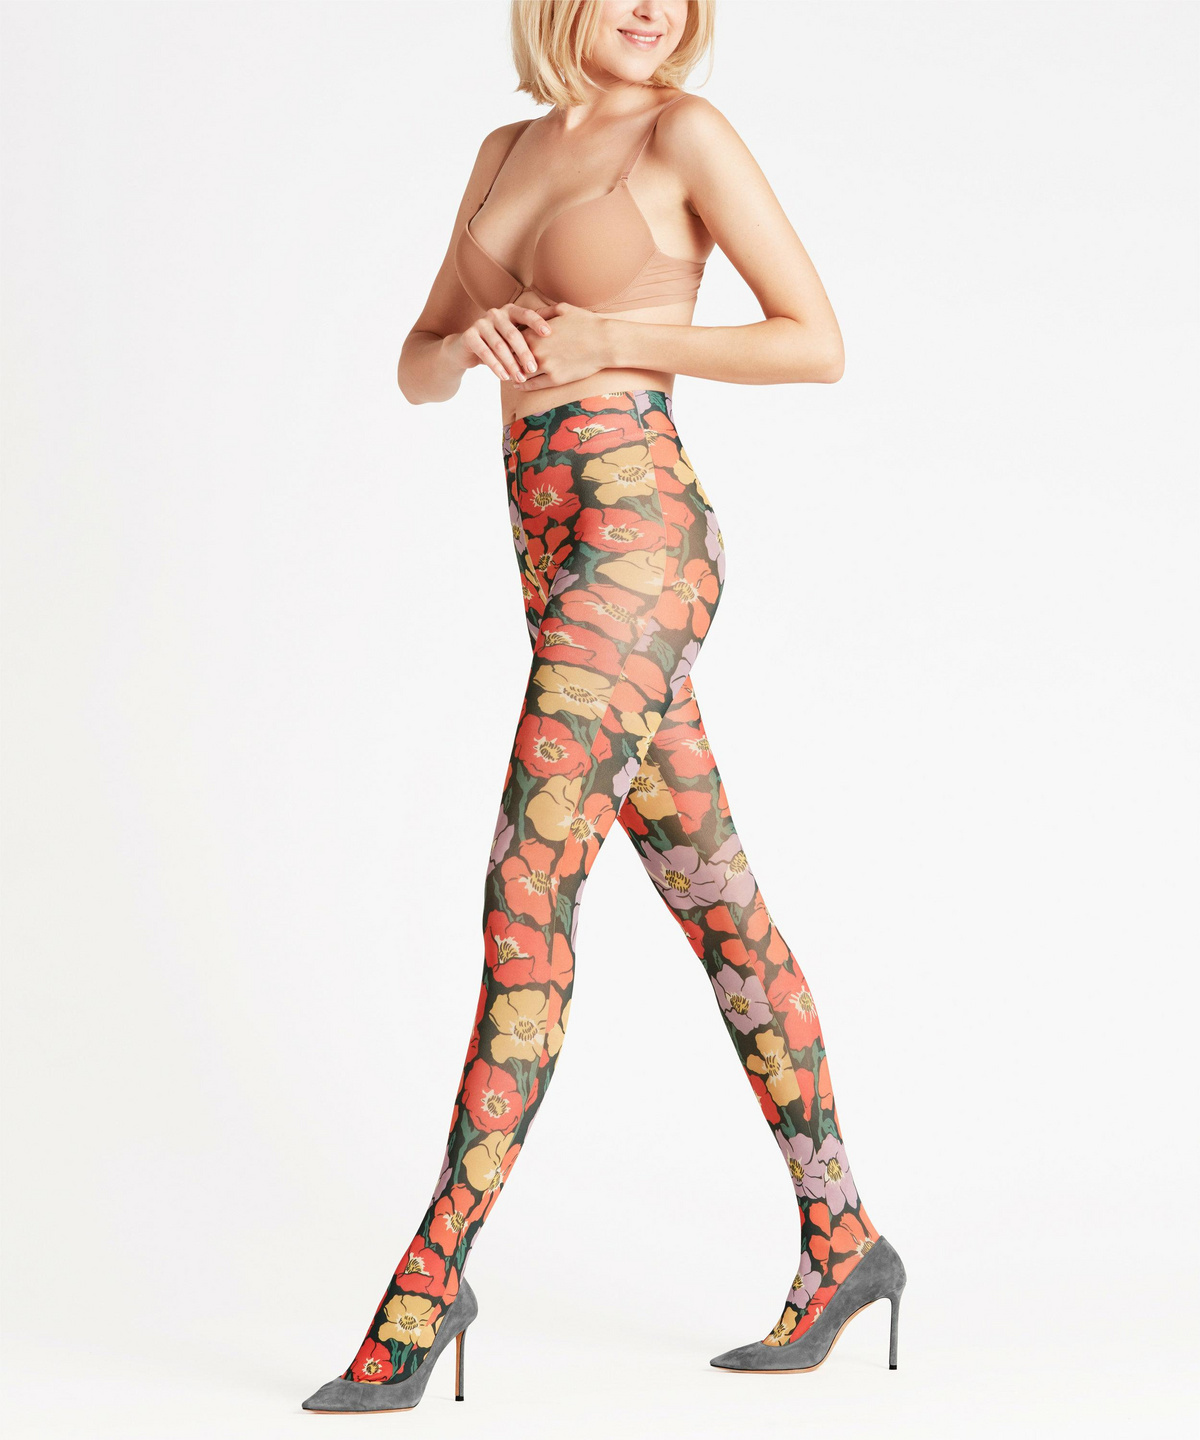 Rhonda 50 DEN Women Tights
in cooperation with LIBERTY